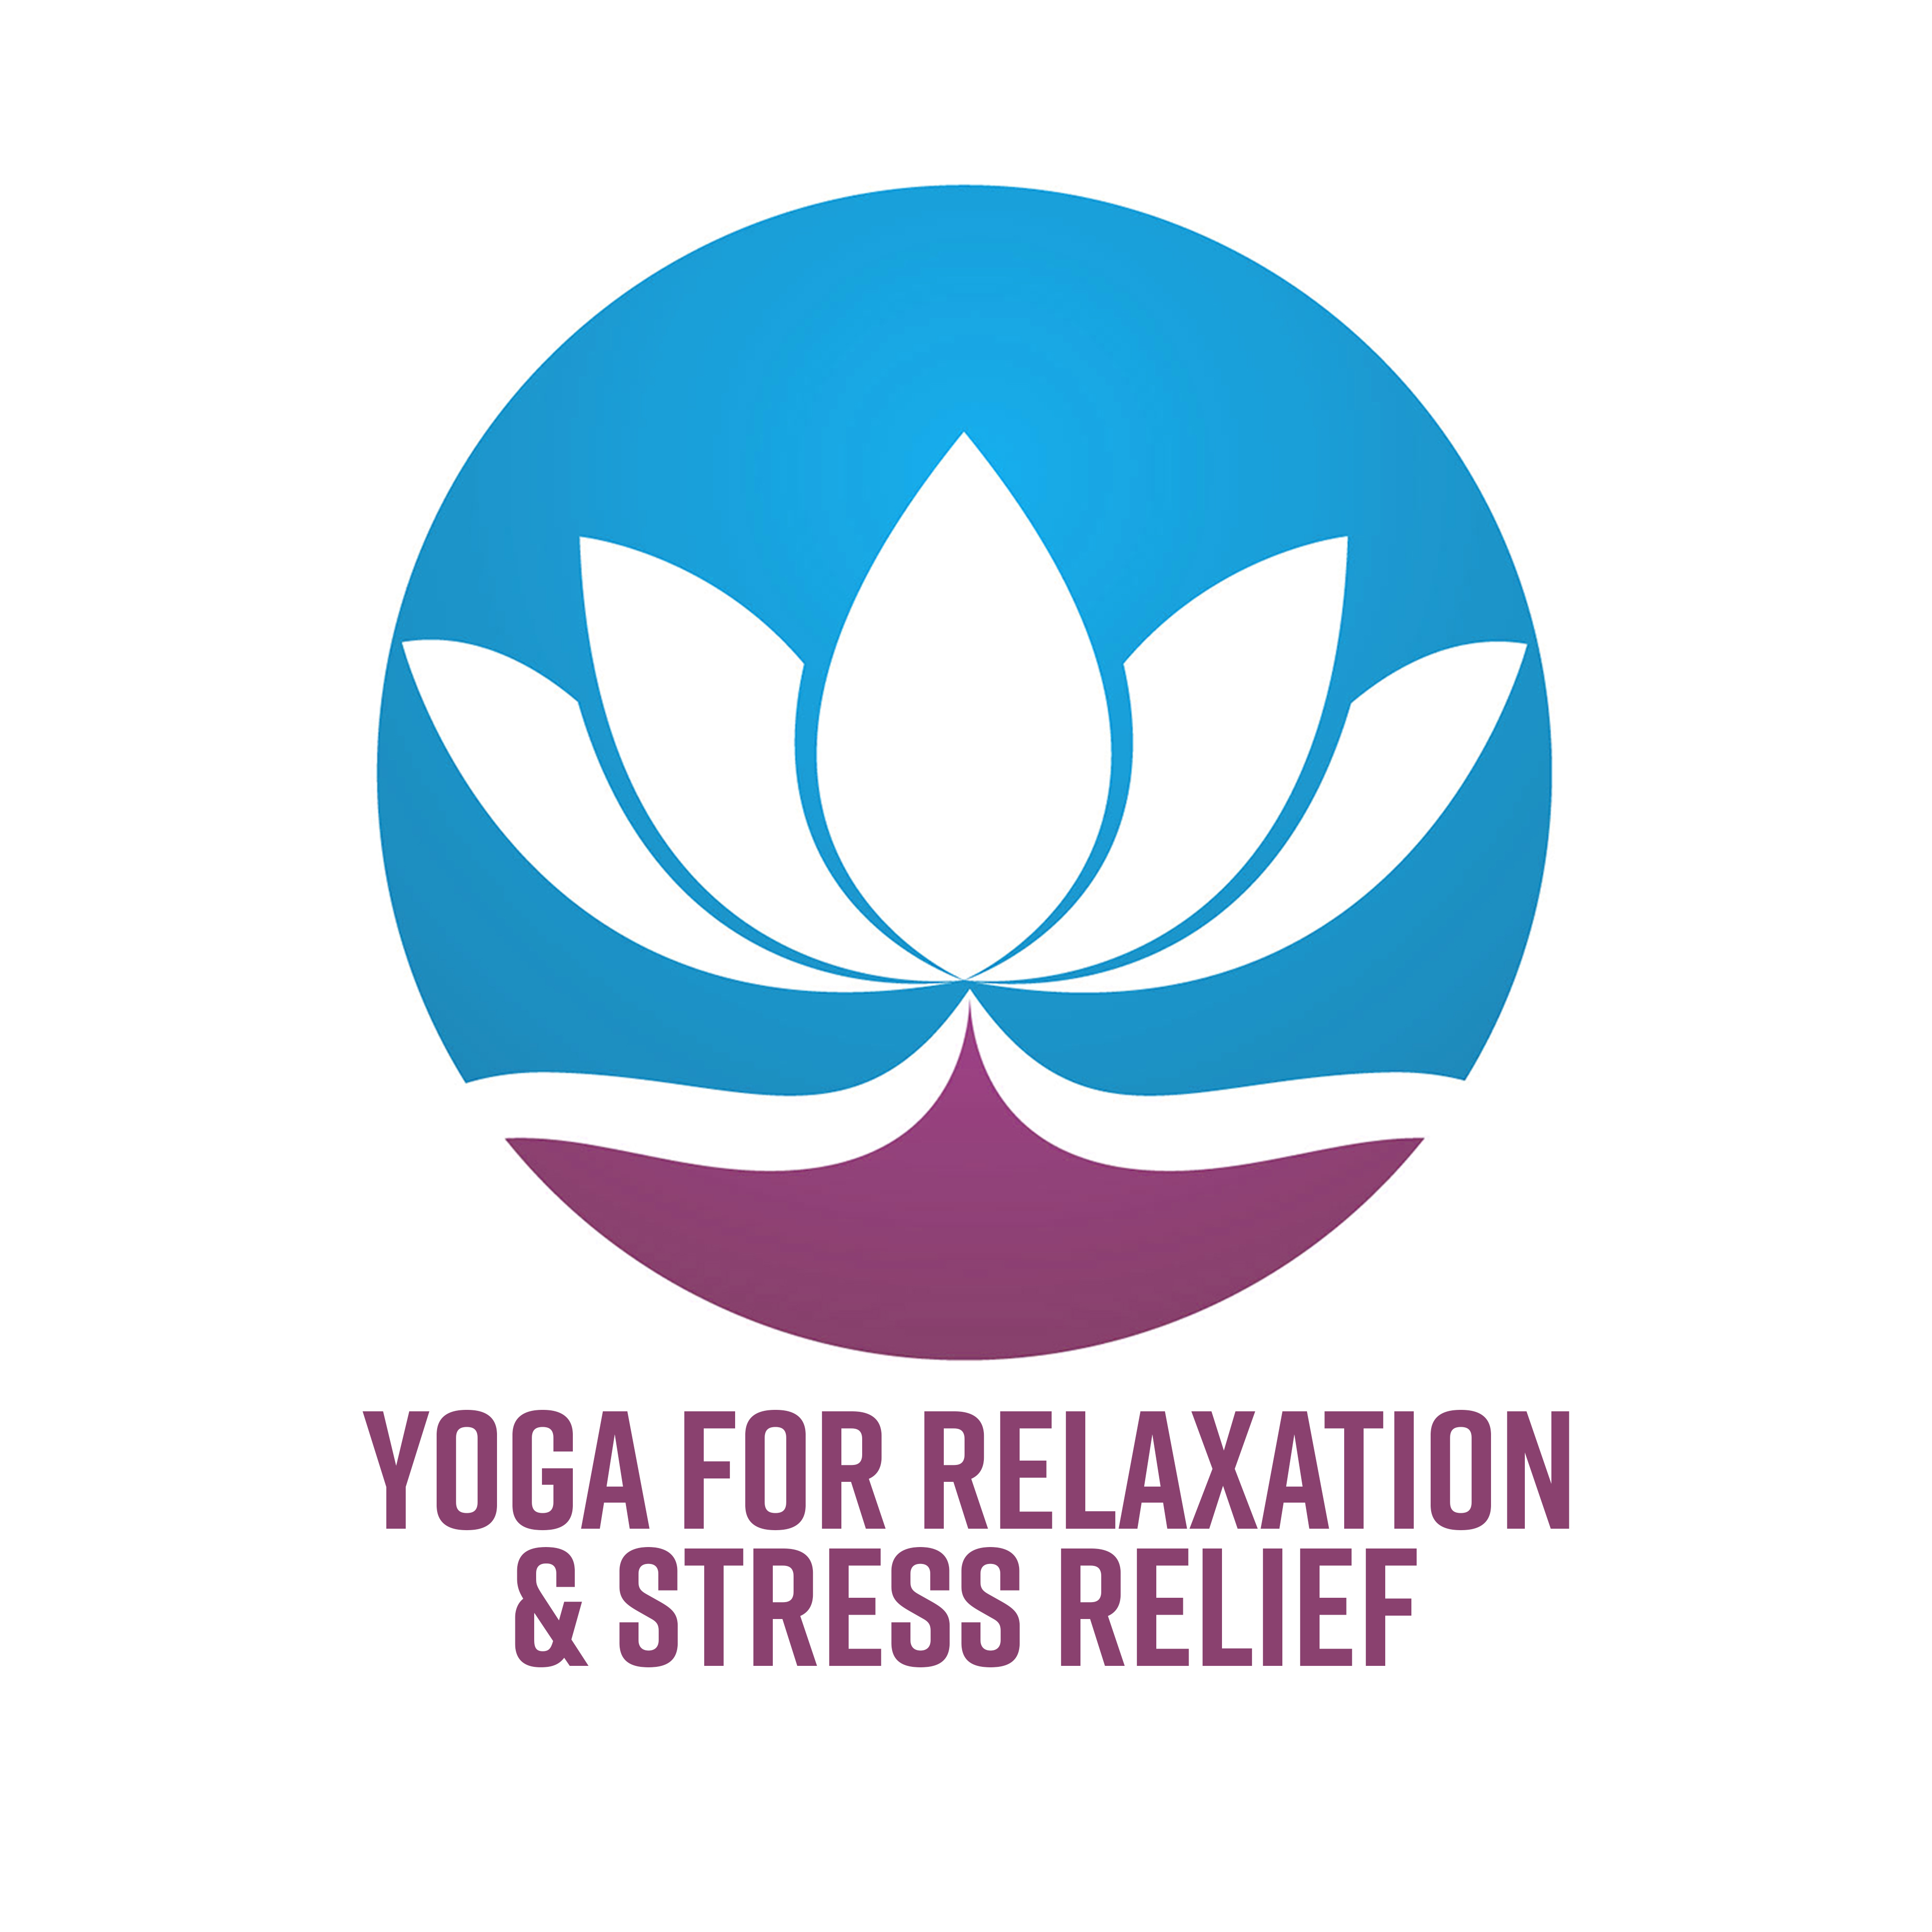 Yoga for Relaxation & Stress Relief